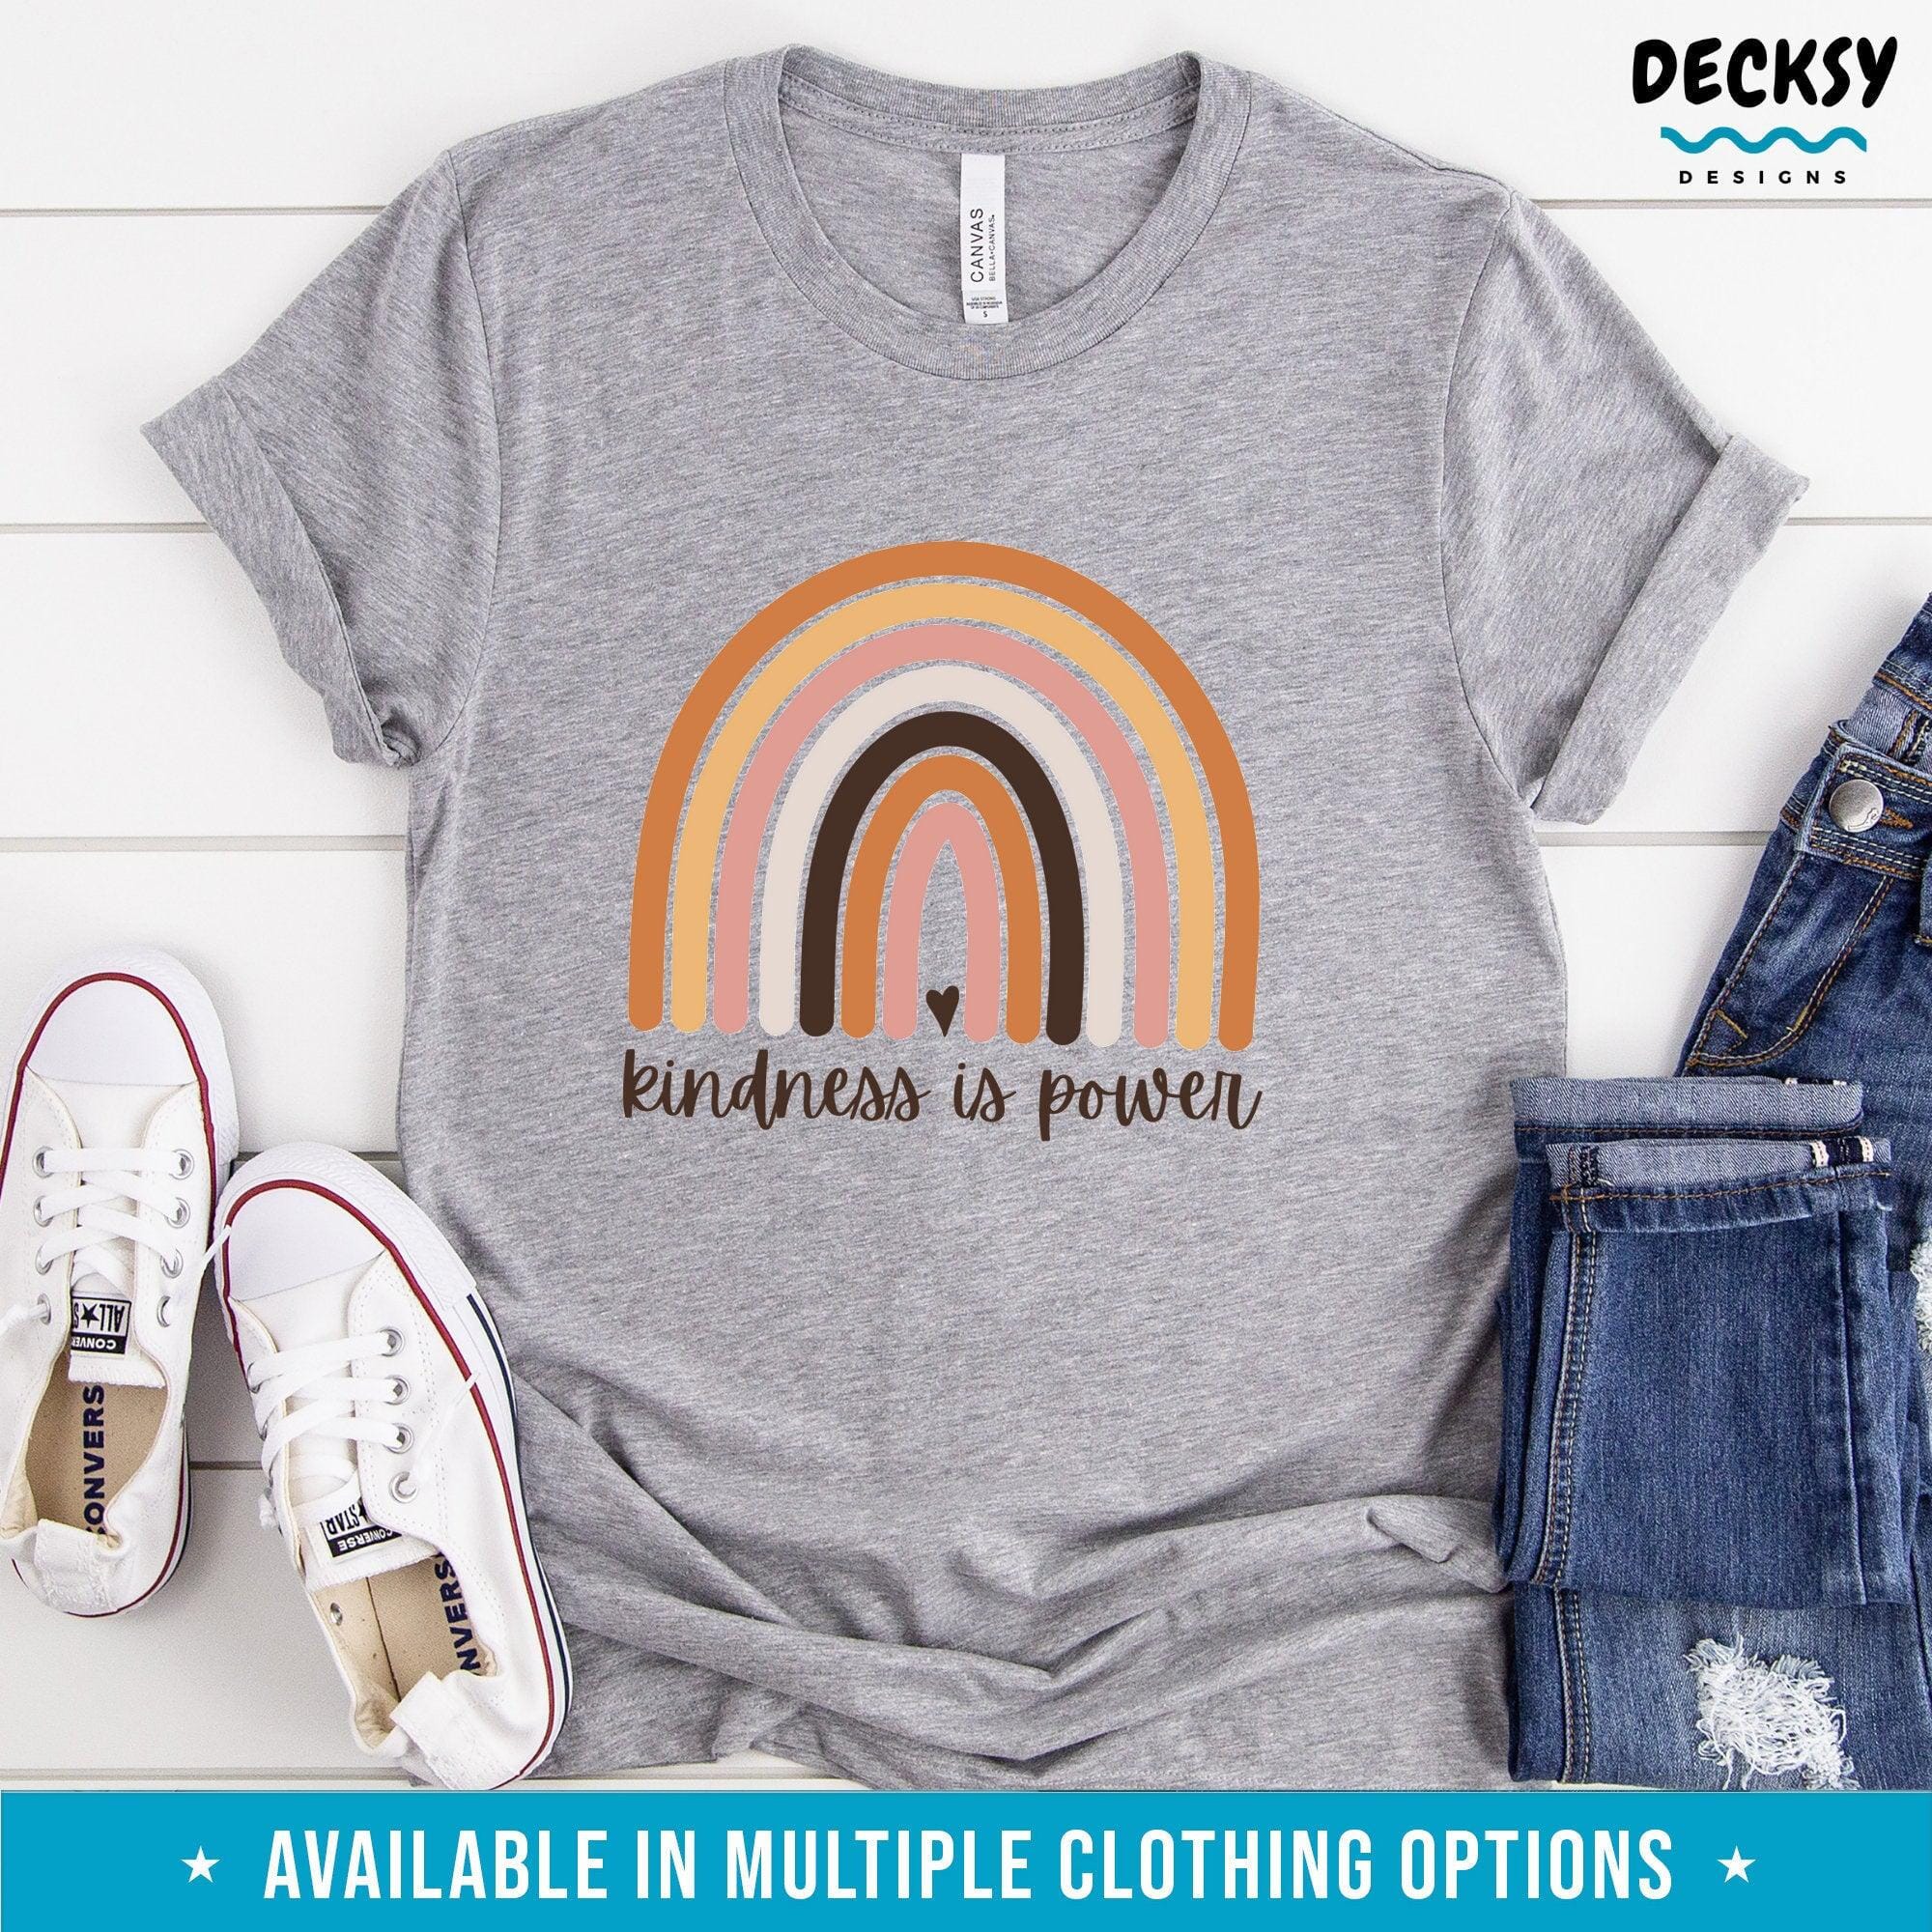 Kindness Shirt, Cute Rainbow Gift-Clothing:Gender-Neutral Adult Clothing:Tops & Tees:T-shirts:Graphic Tees-DecksyDesigns